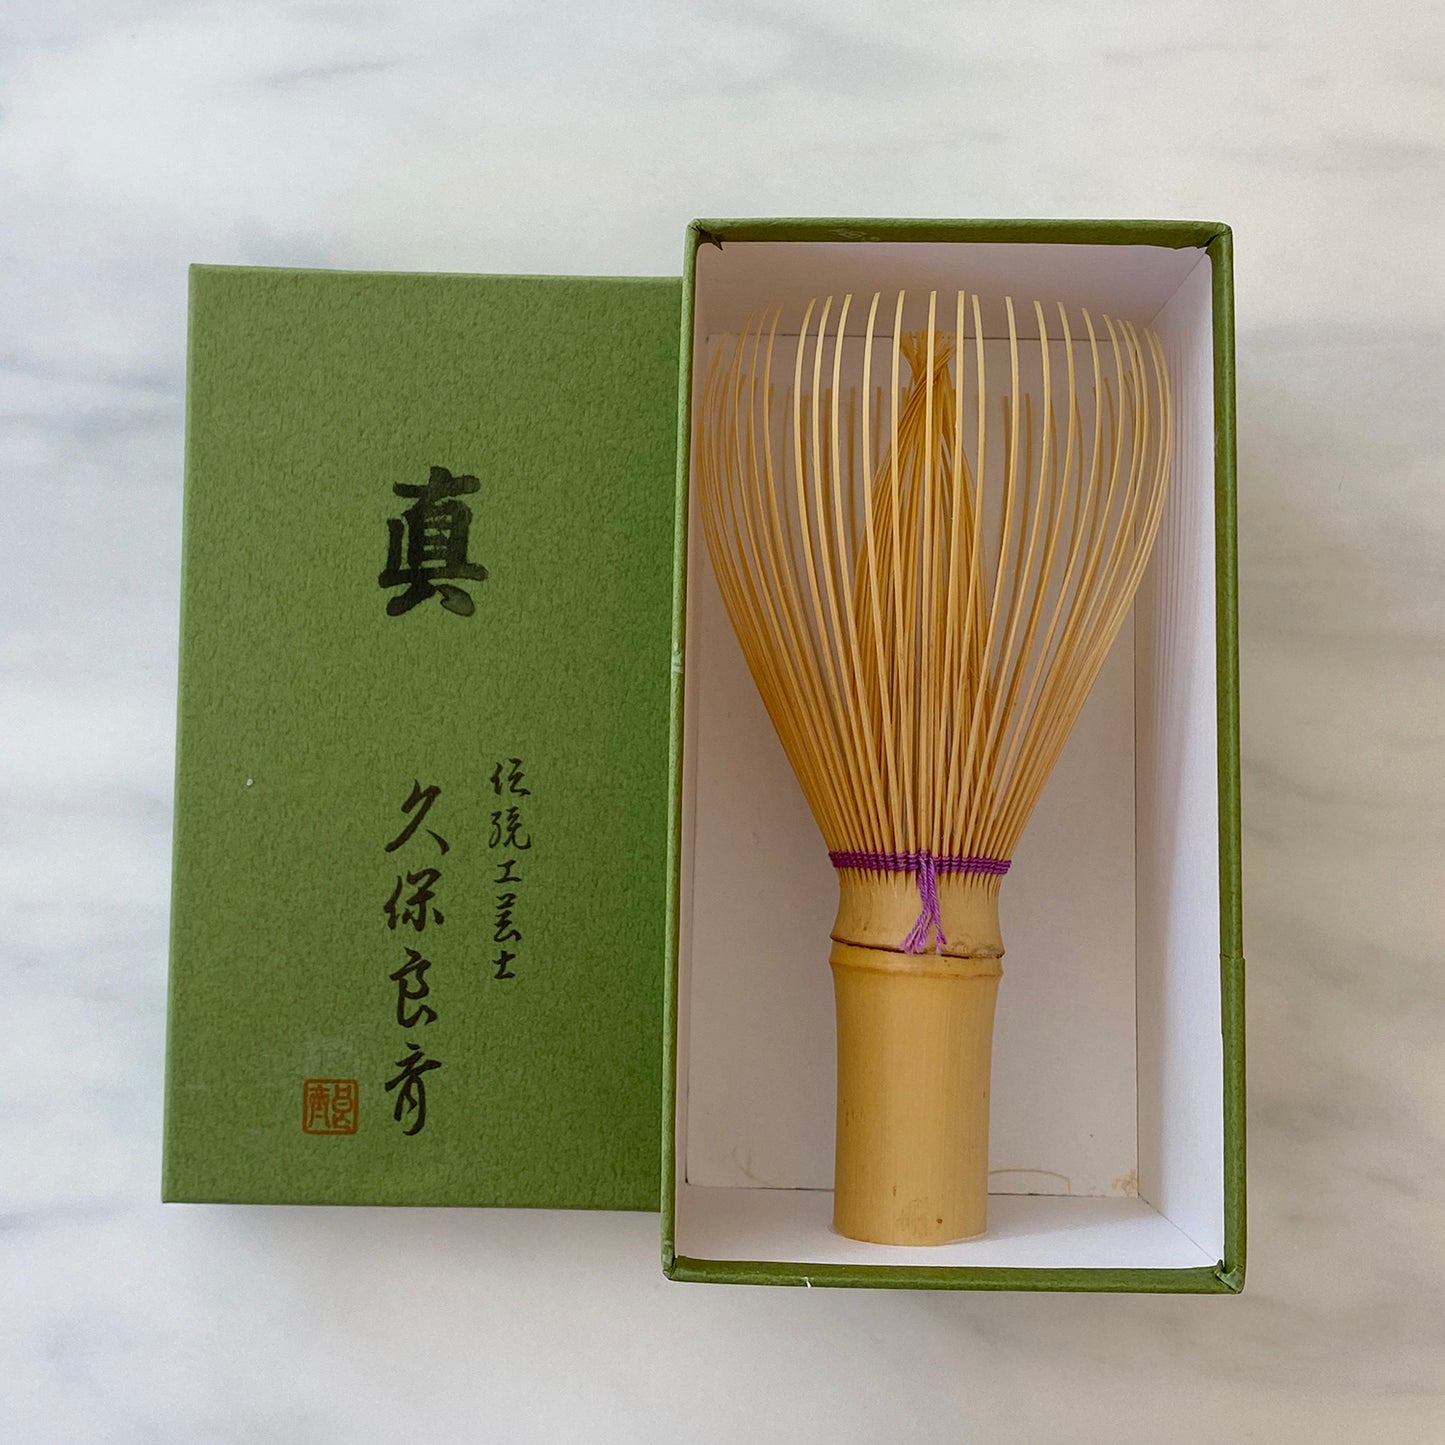 White Whisk with Color String Shirotake Takayama Chasen l 真 白竹 高山茶筅 色糸